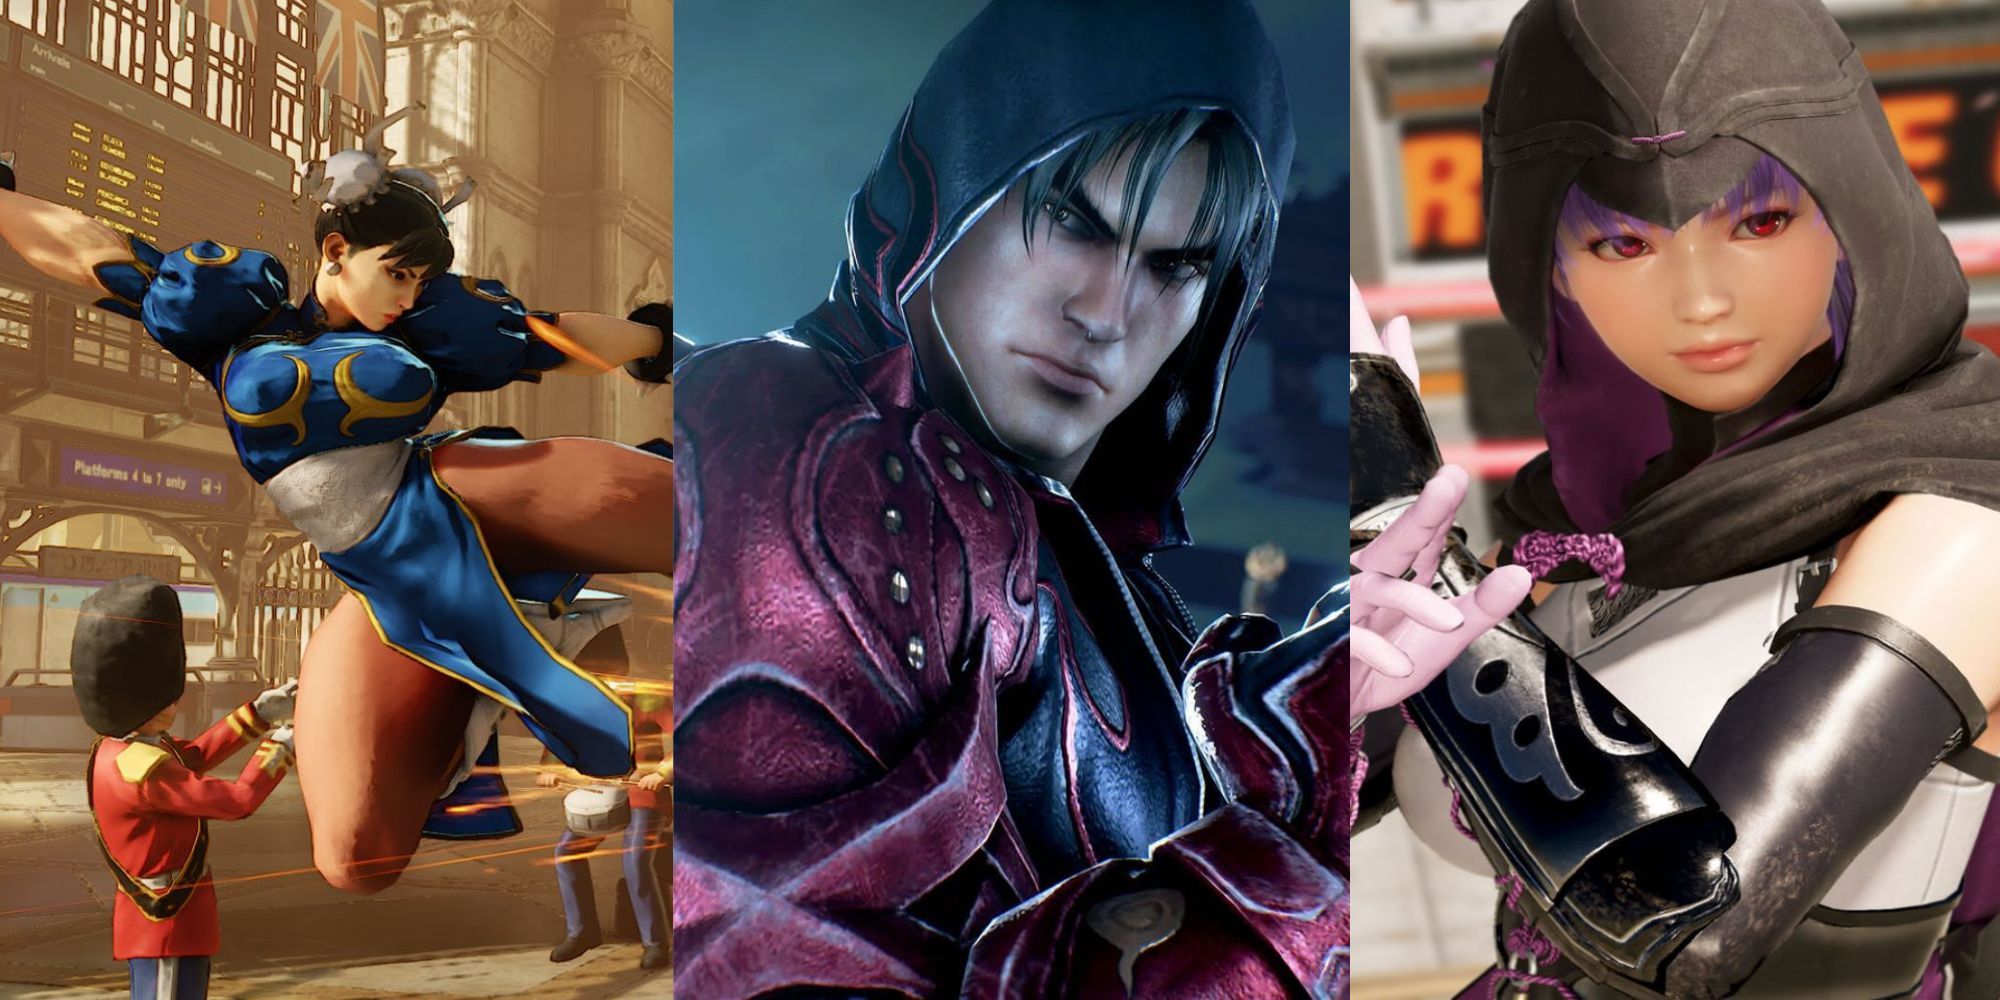 Chun Li from Street Fighter 5, Jin Kazama from Tekken 7 and Ayane from Dead or Alive 6